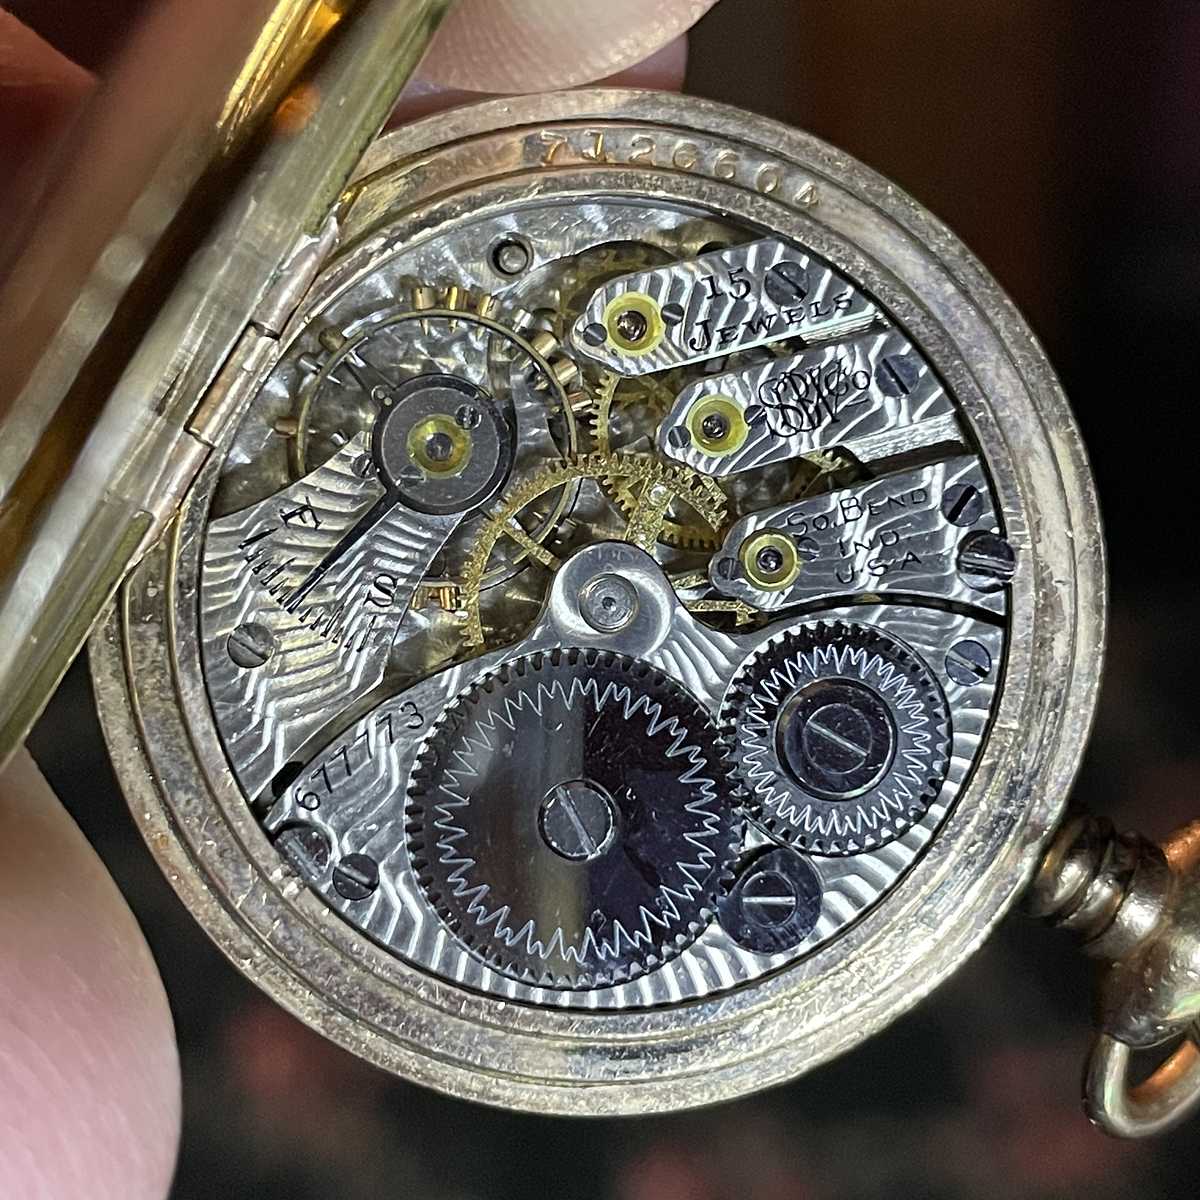 1911 South Bend Watch Grade 110 Movement in pocket watch case